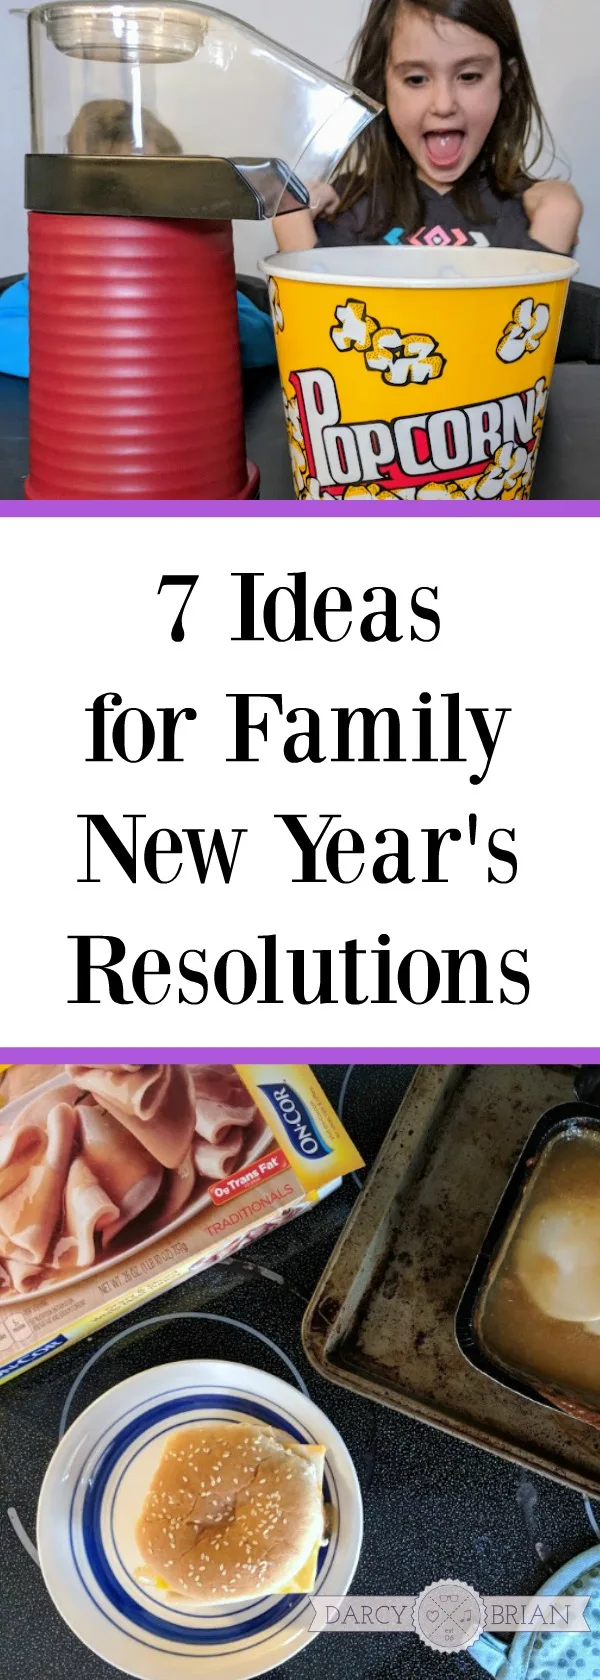 AD: Do you set resolutions as a family? Here are 7 Ideas for Family New Year's Resolutions to get you started! From gratitude to organization, these ideas are great to do with your kids. #CountOnCor #newyears #resolutions #familytime #parenting